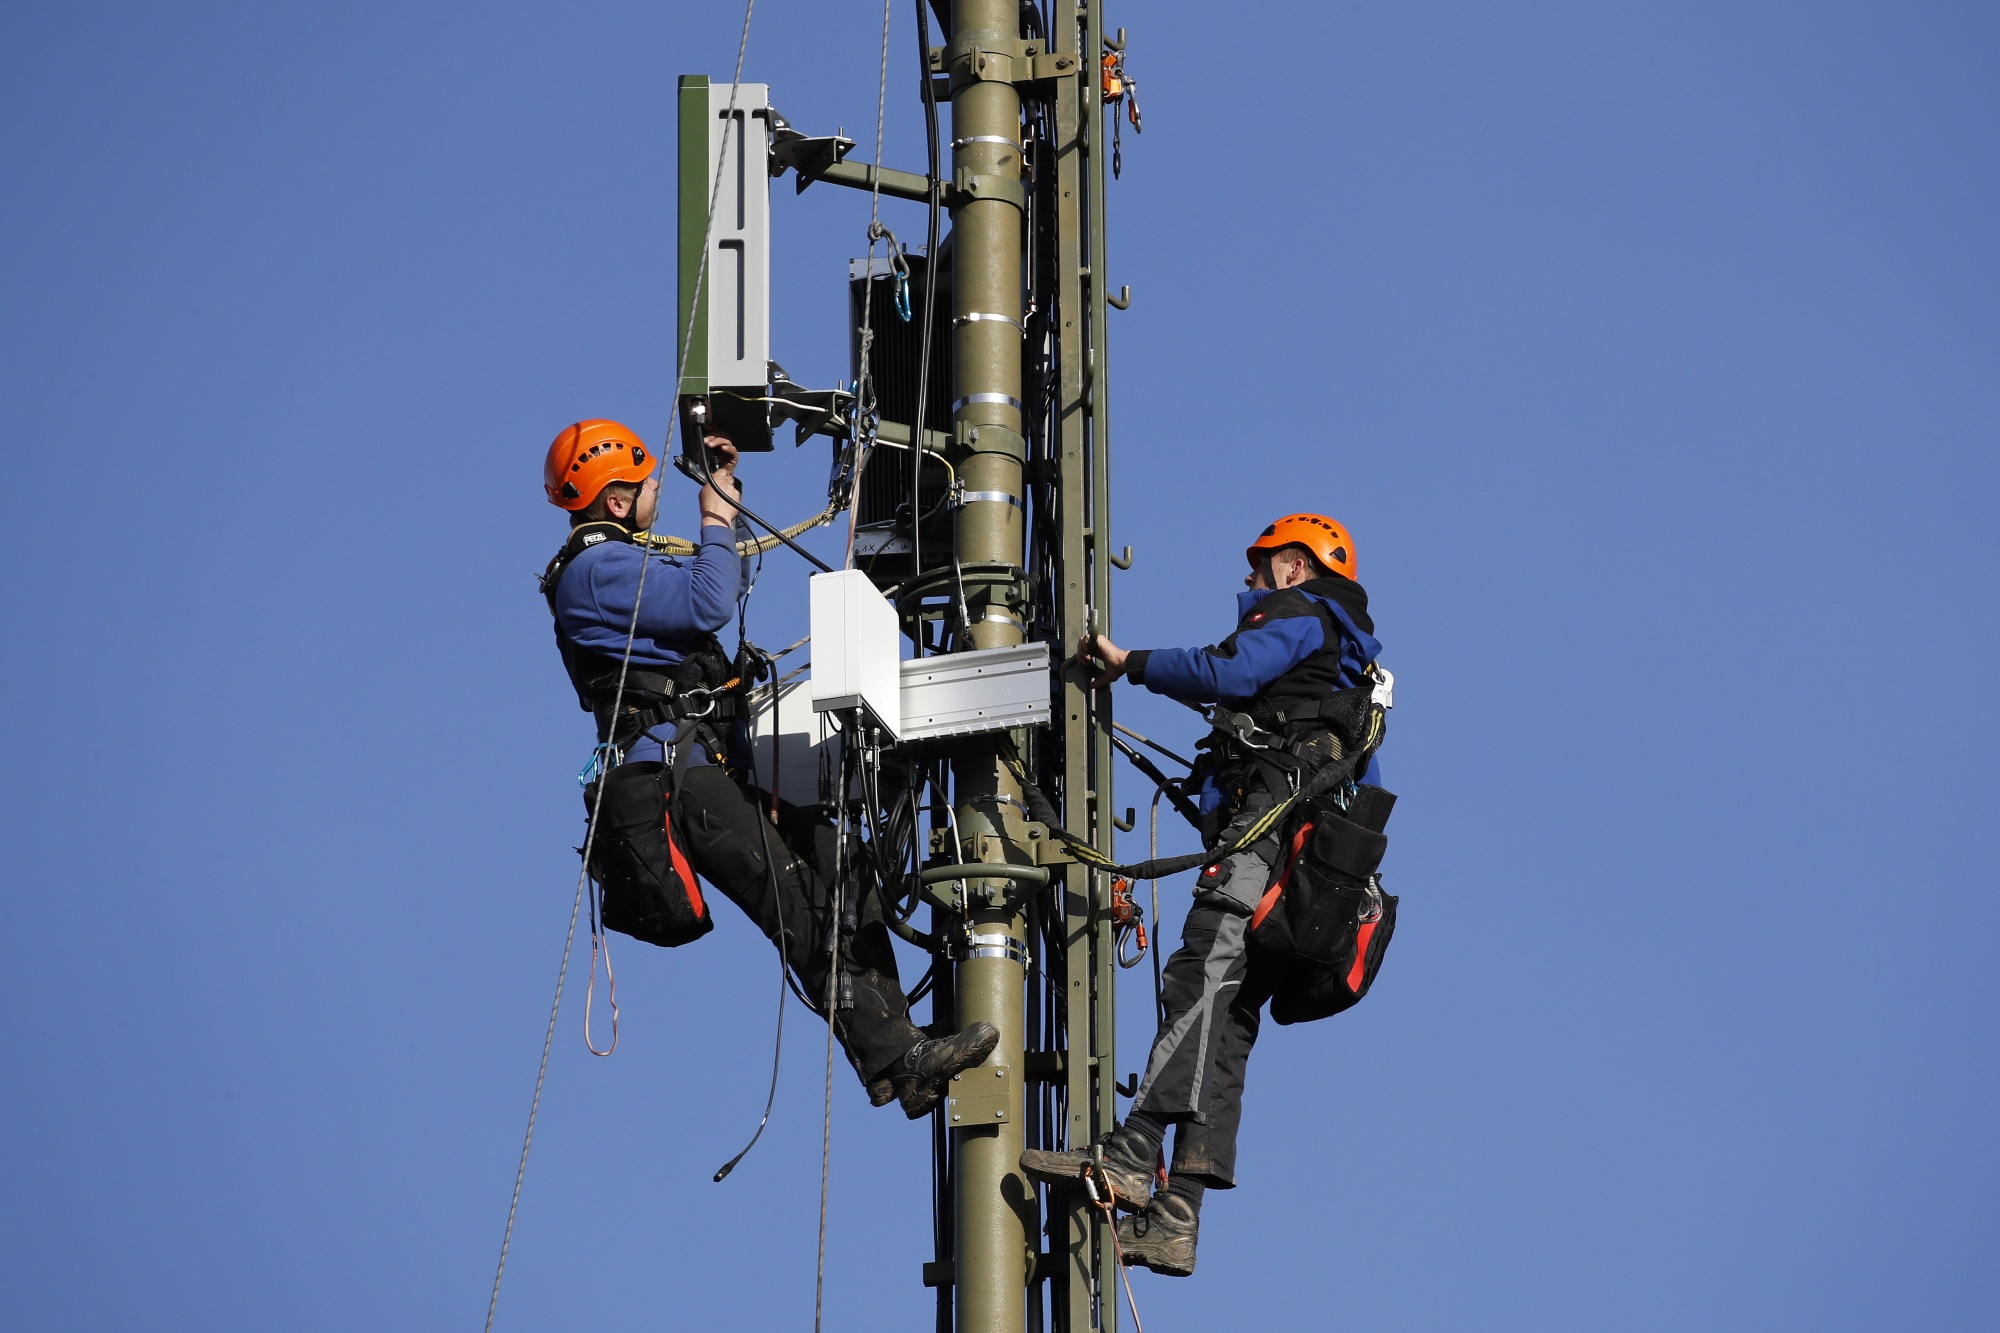 Engineers scale a Swisscom AG telecommunication network mast to install Ericsson AB 5G apparatus in Hindelbank, Switzerland.